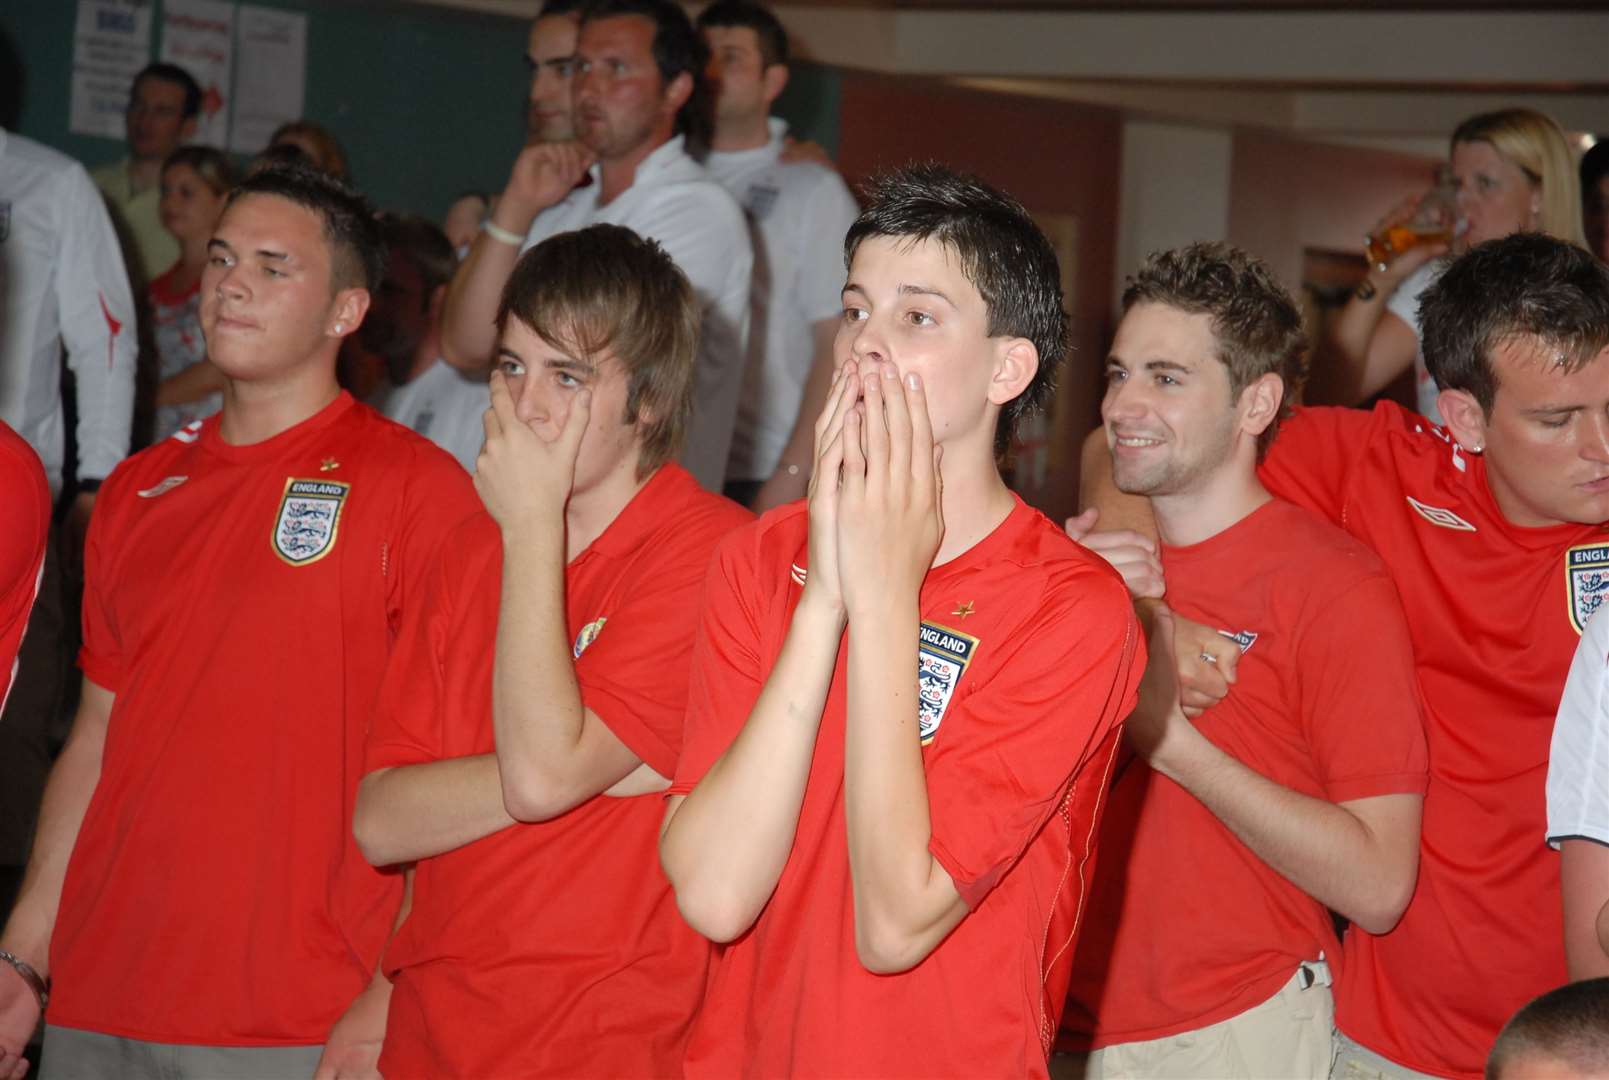 Supporters at the United Services Club, Rainham, can't bear to watch the penalty shoot-out against Portugal in the 2006 World Cup quarter final